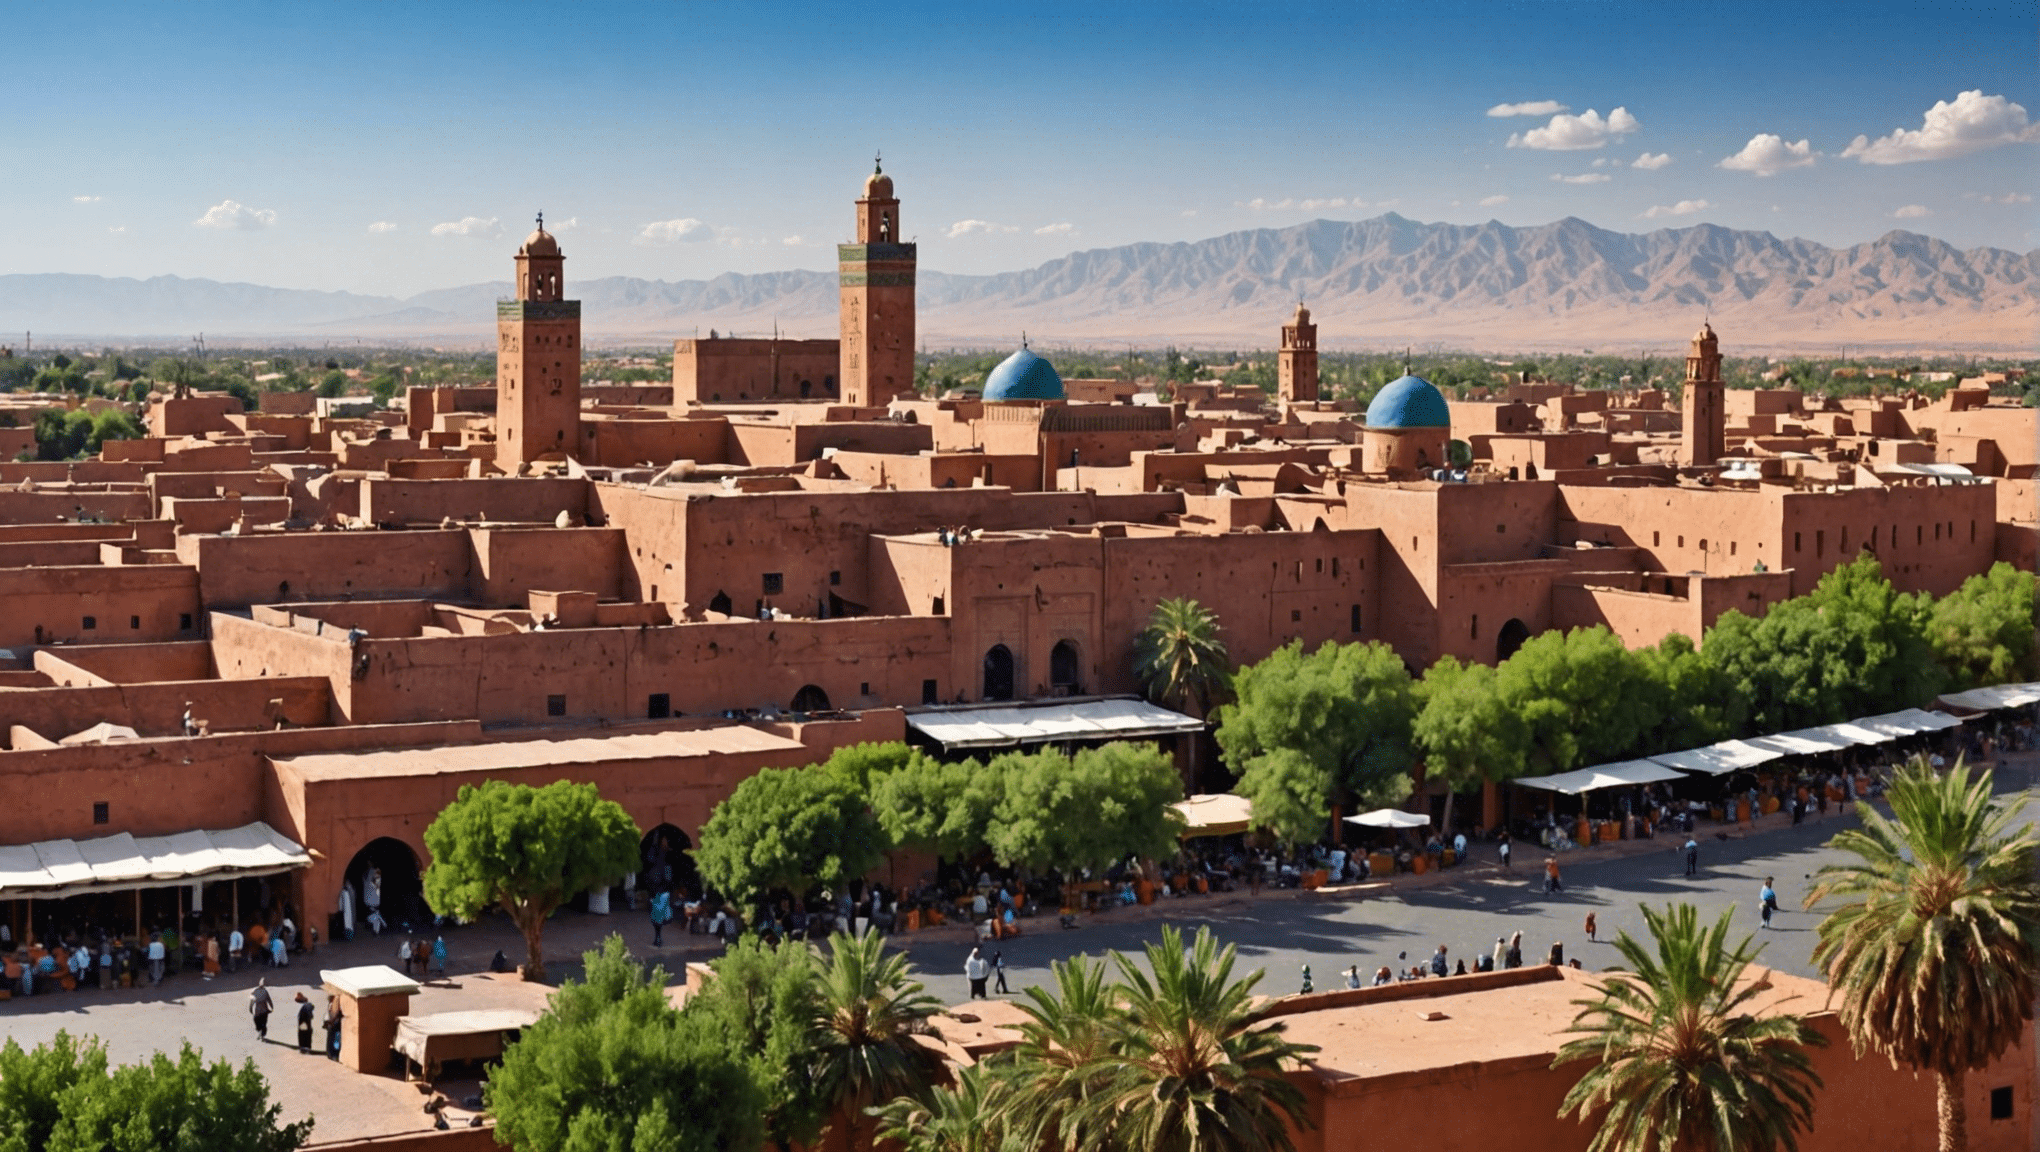 find out what the weather is like in marrakech in june with this detailed guide, including temperature, humidity, and precipitation information, to help you plan your trip effectively.